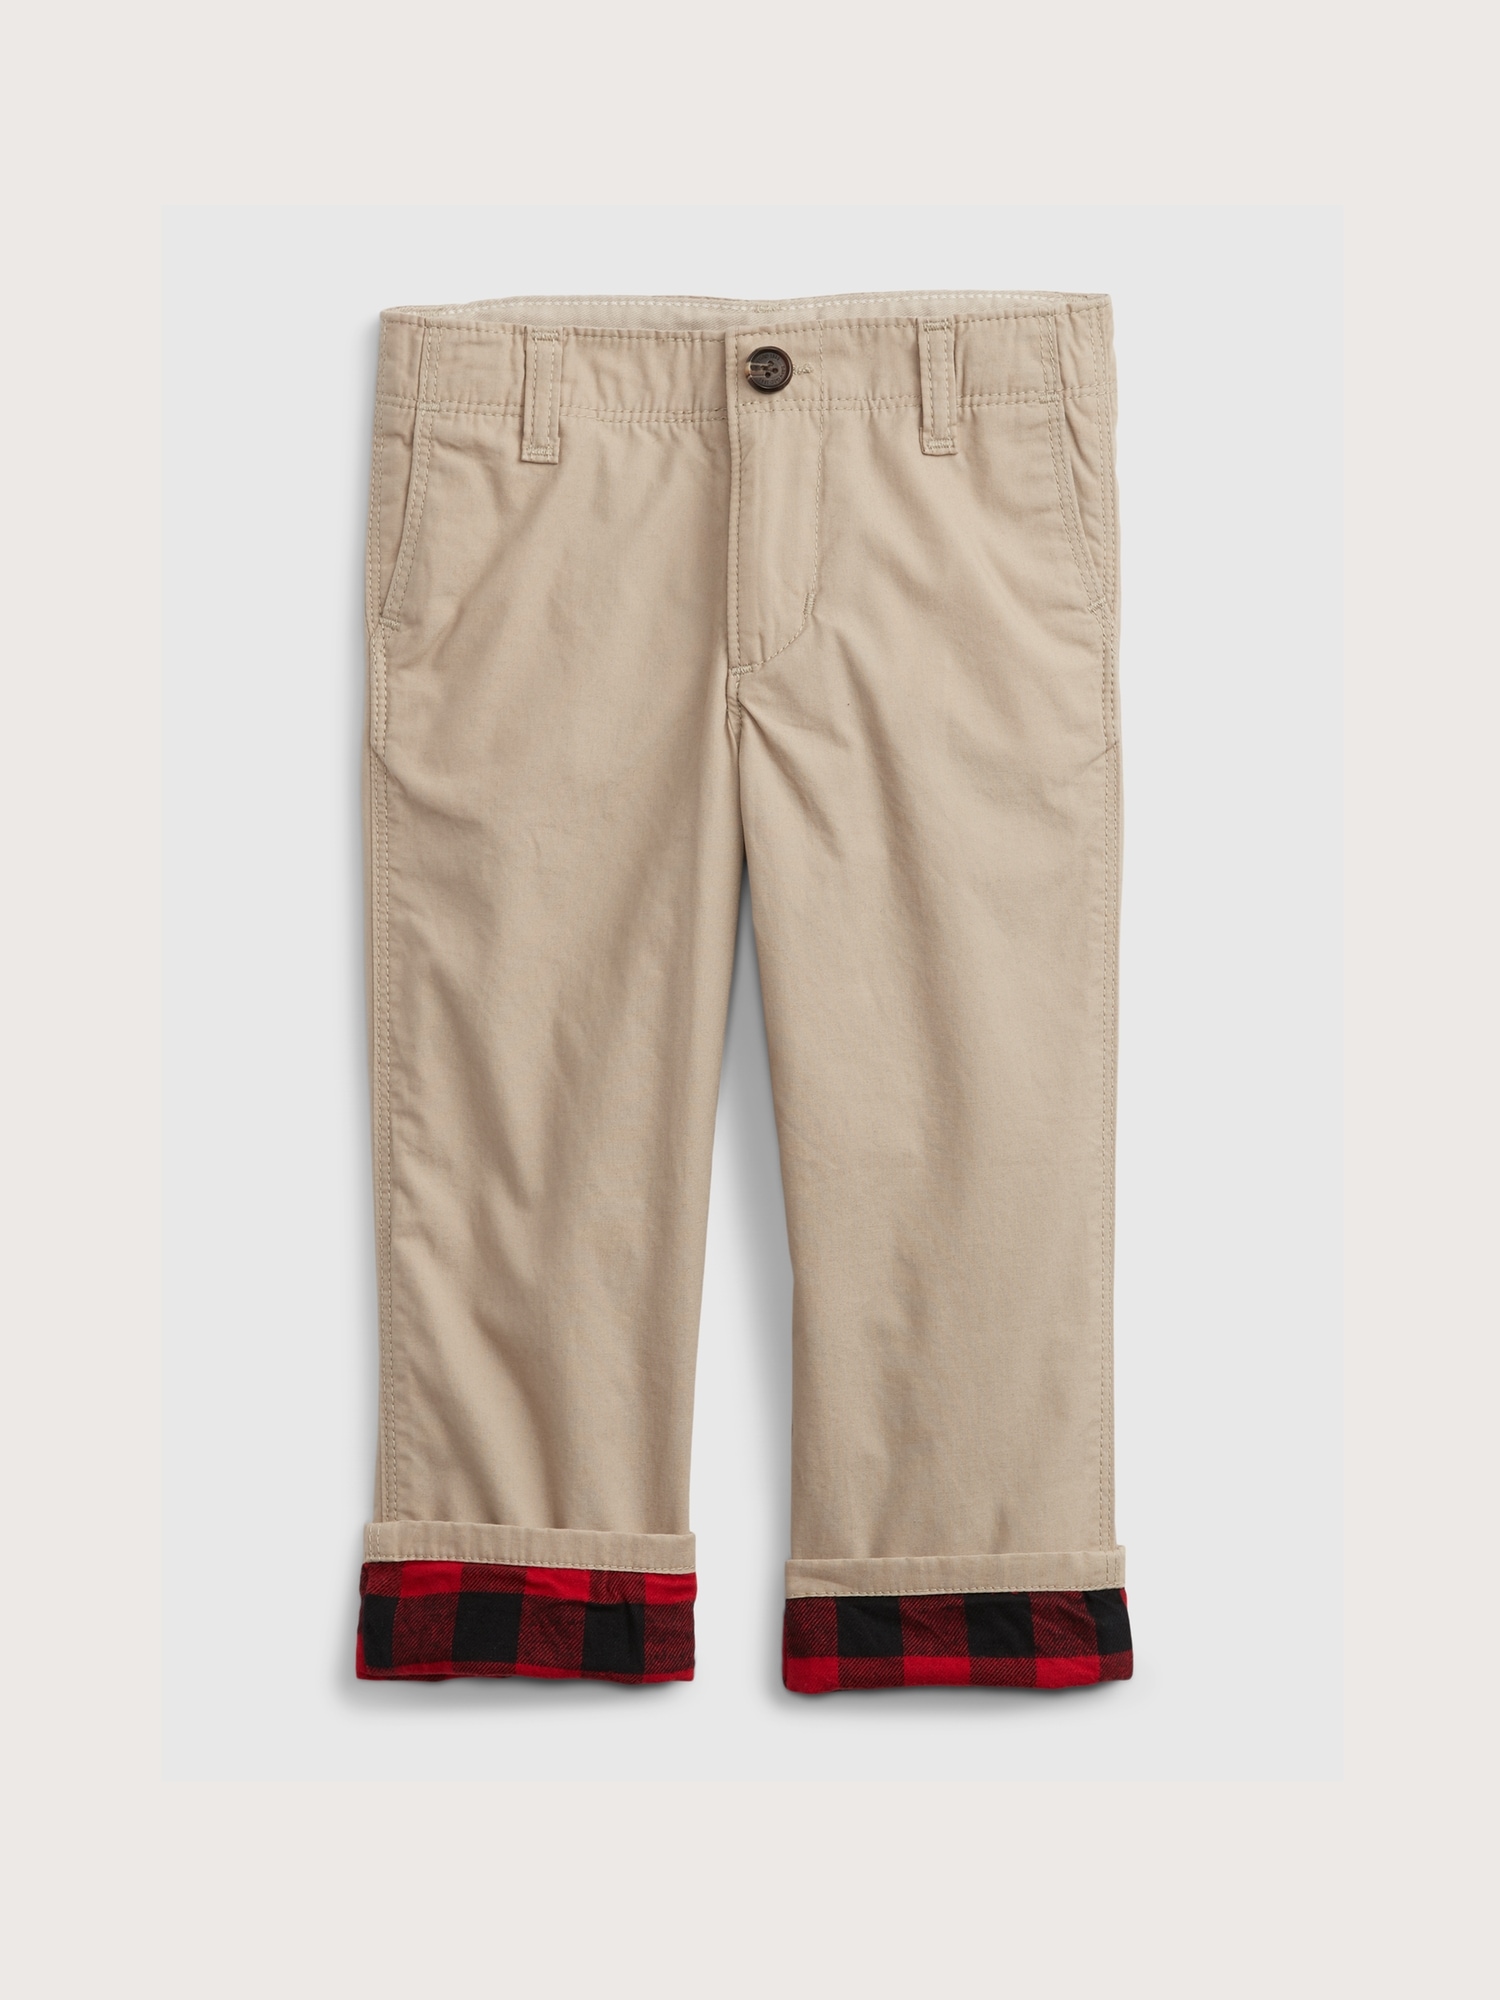 Toddler Lined Khakis